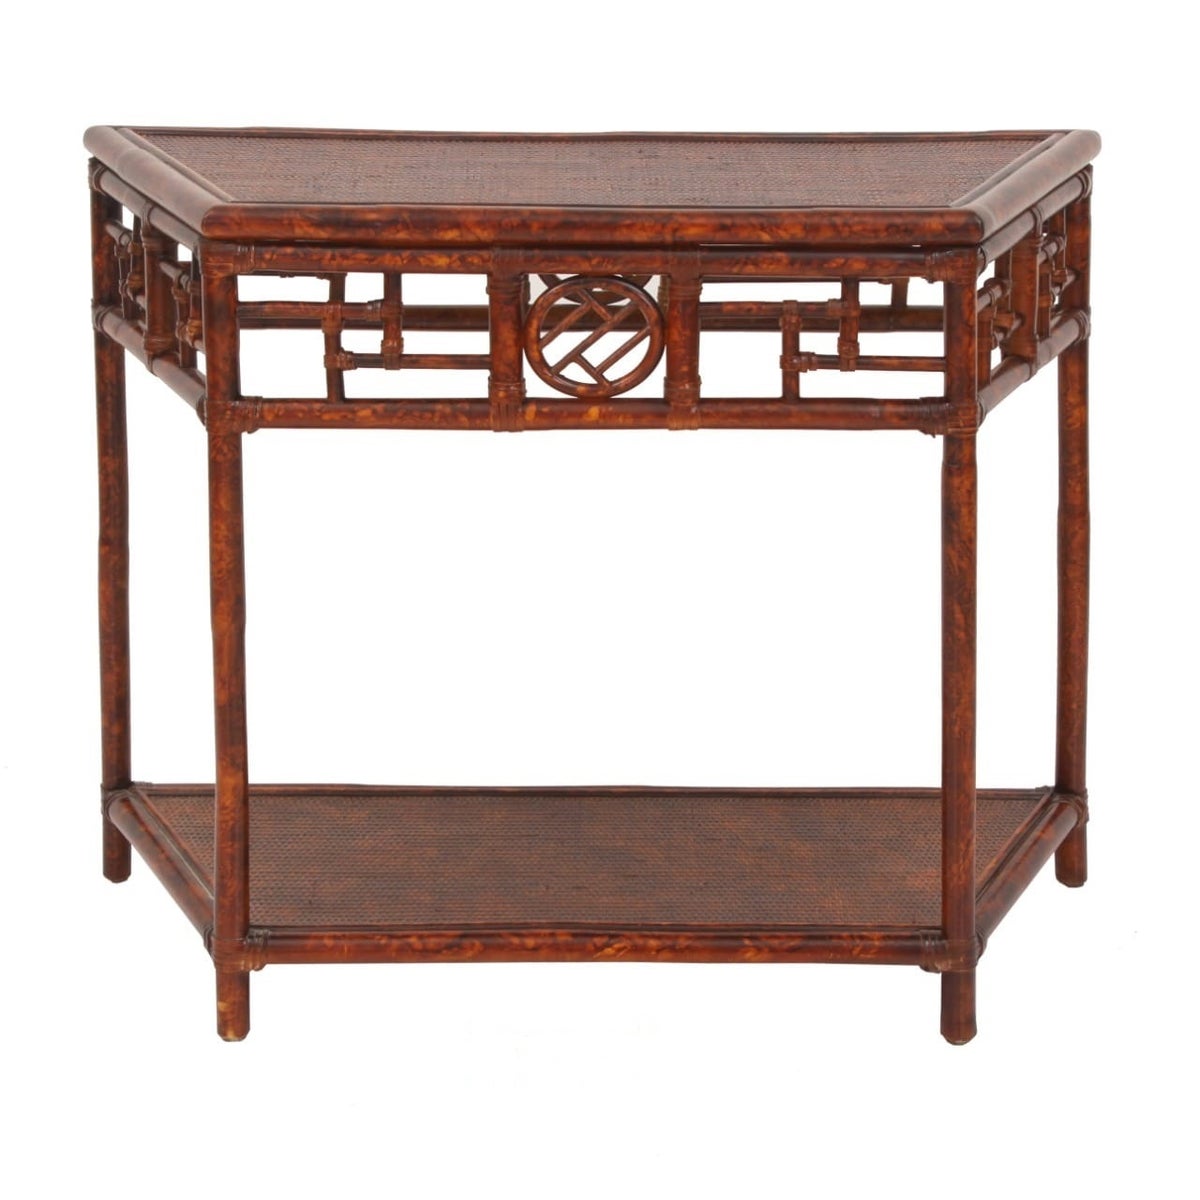 Demilune Table, Large Woven Top Rattan Frame with Leather Wraps Color - Tortoise This Item Will